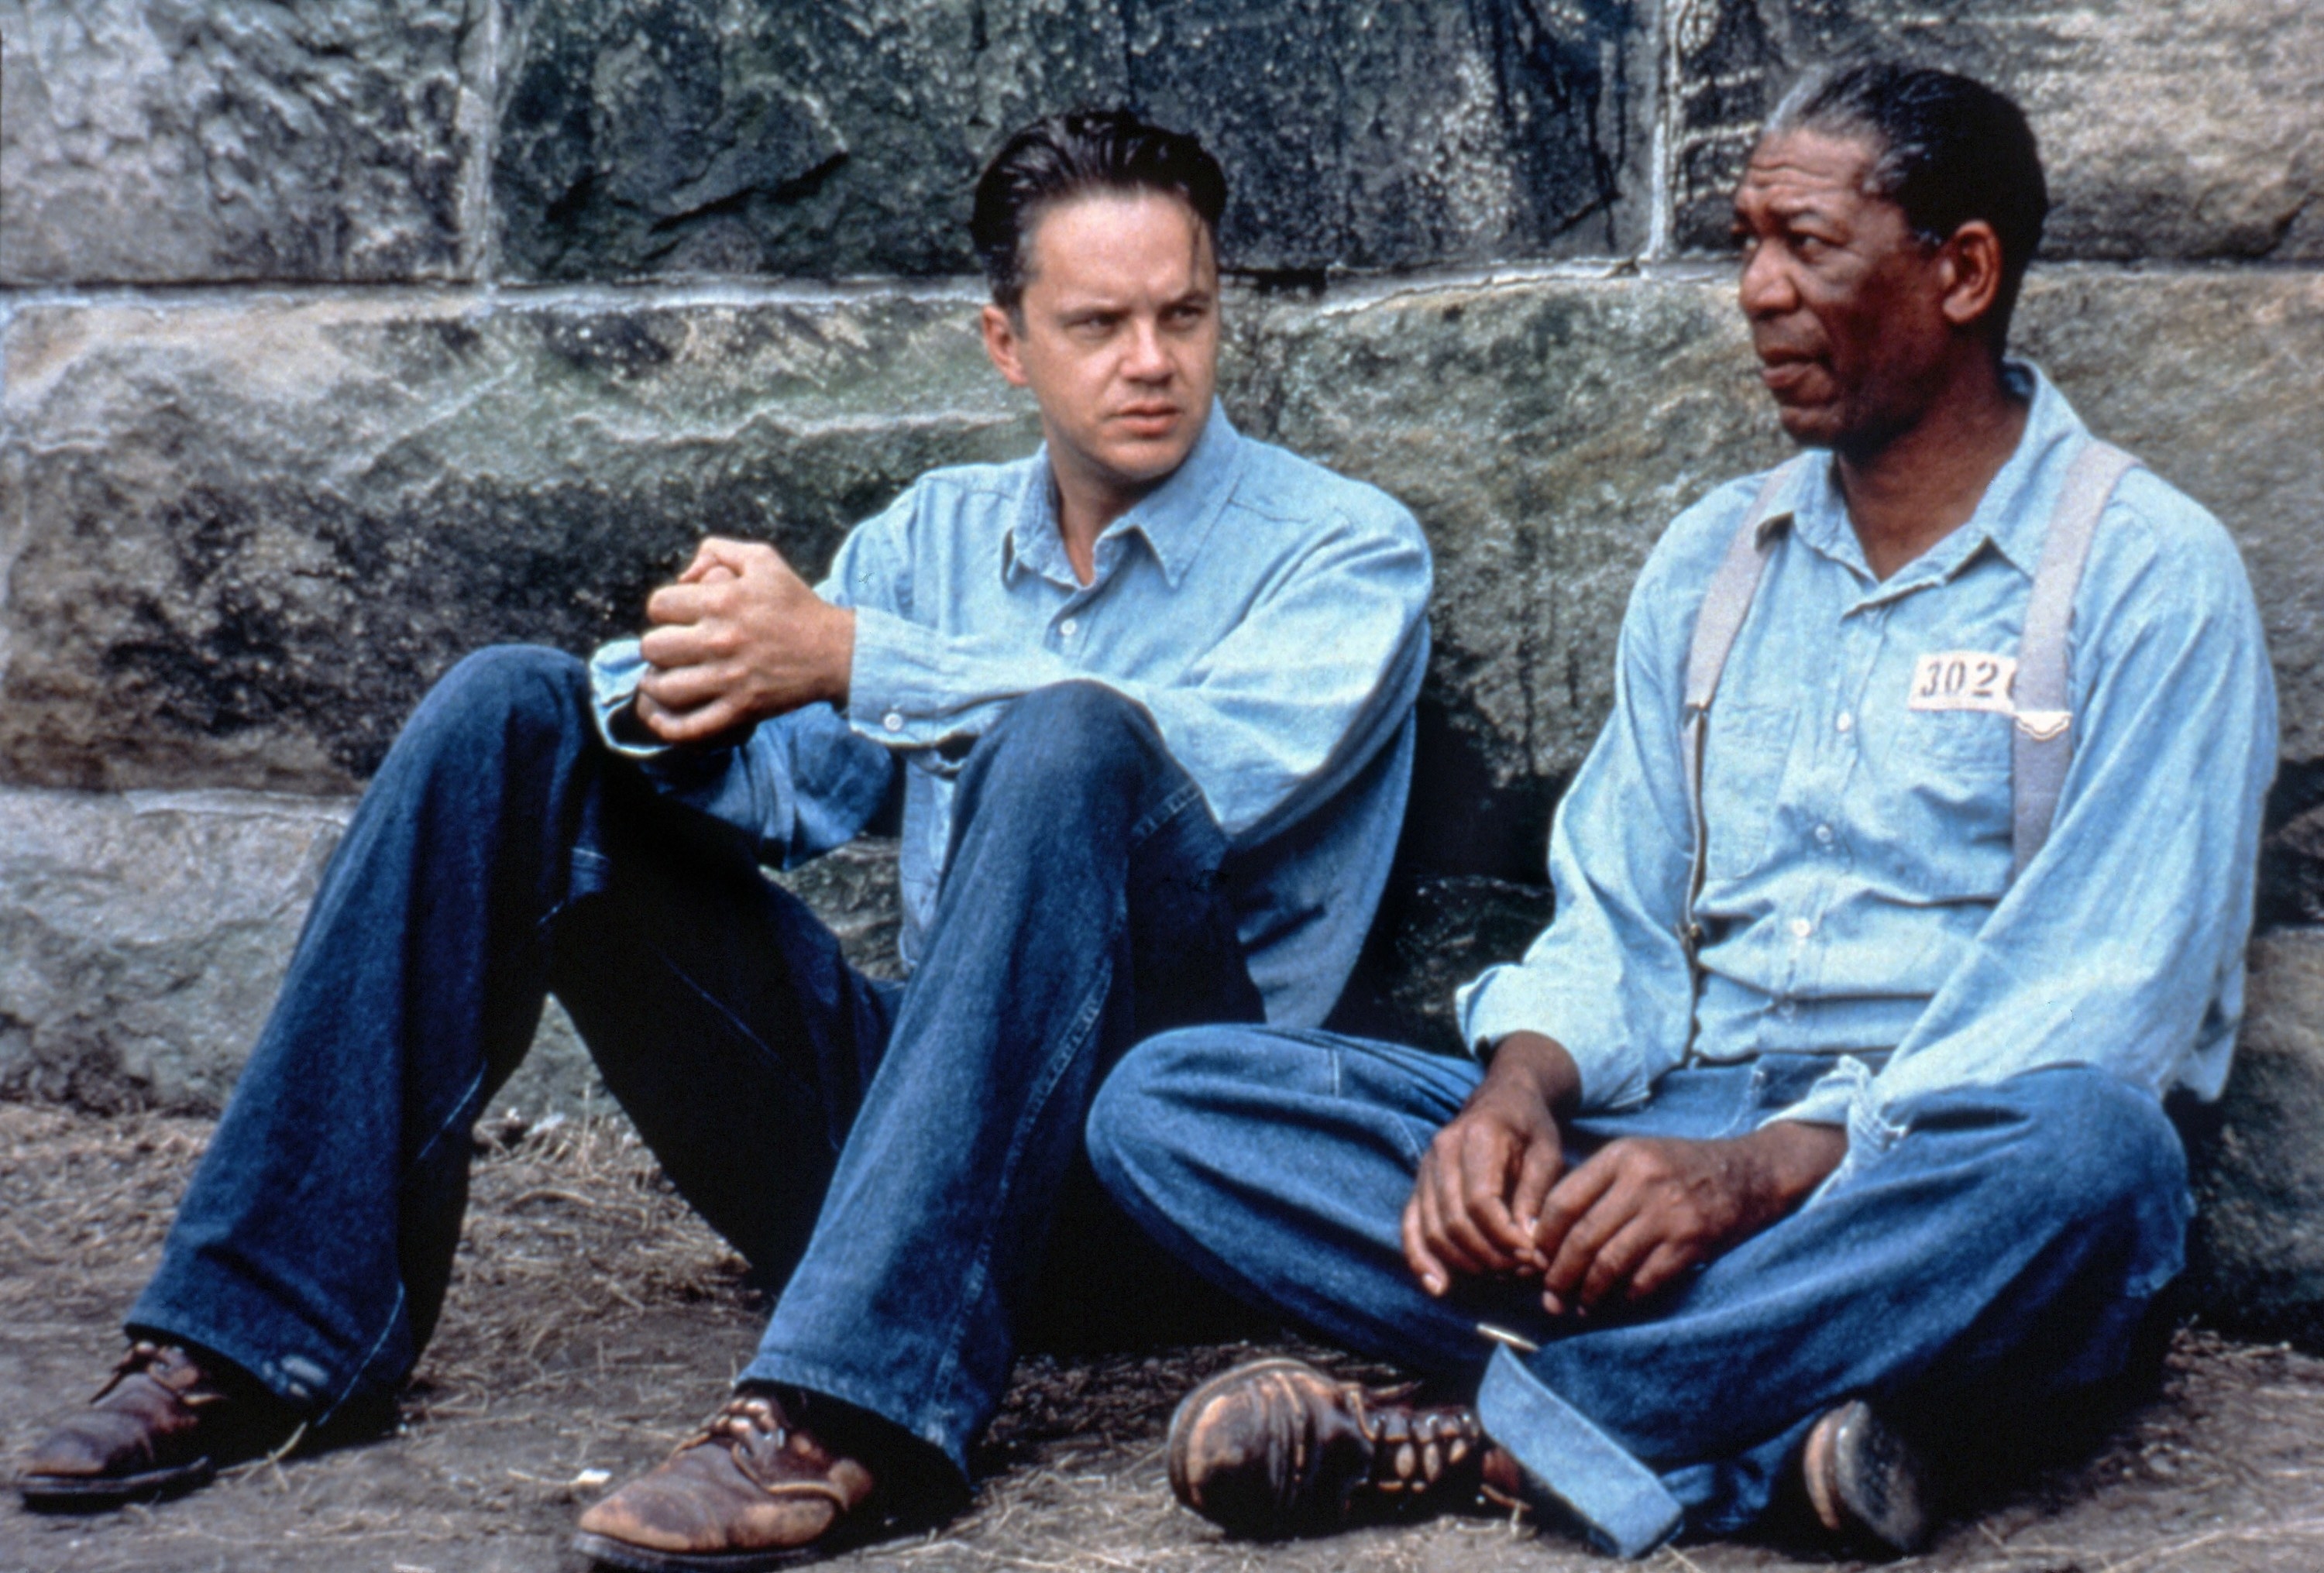 Red and Andy sitting in the prison yard together